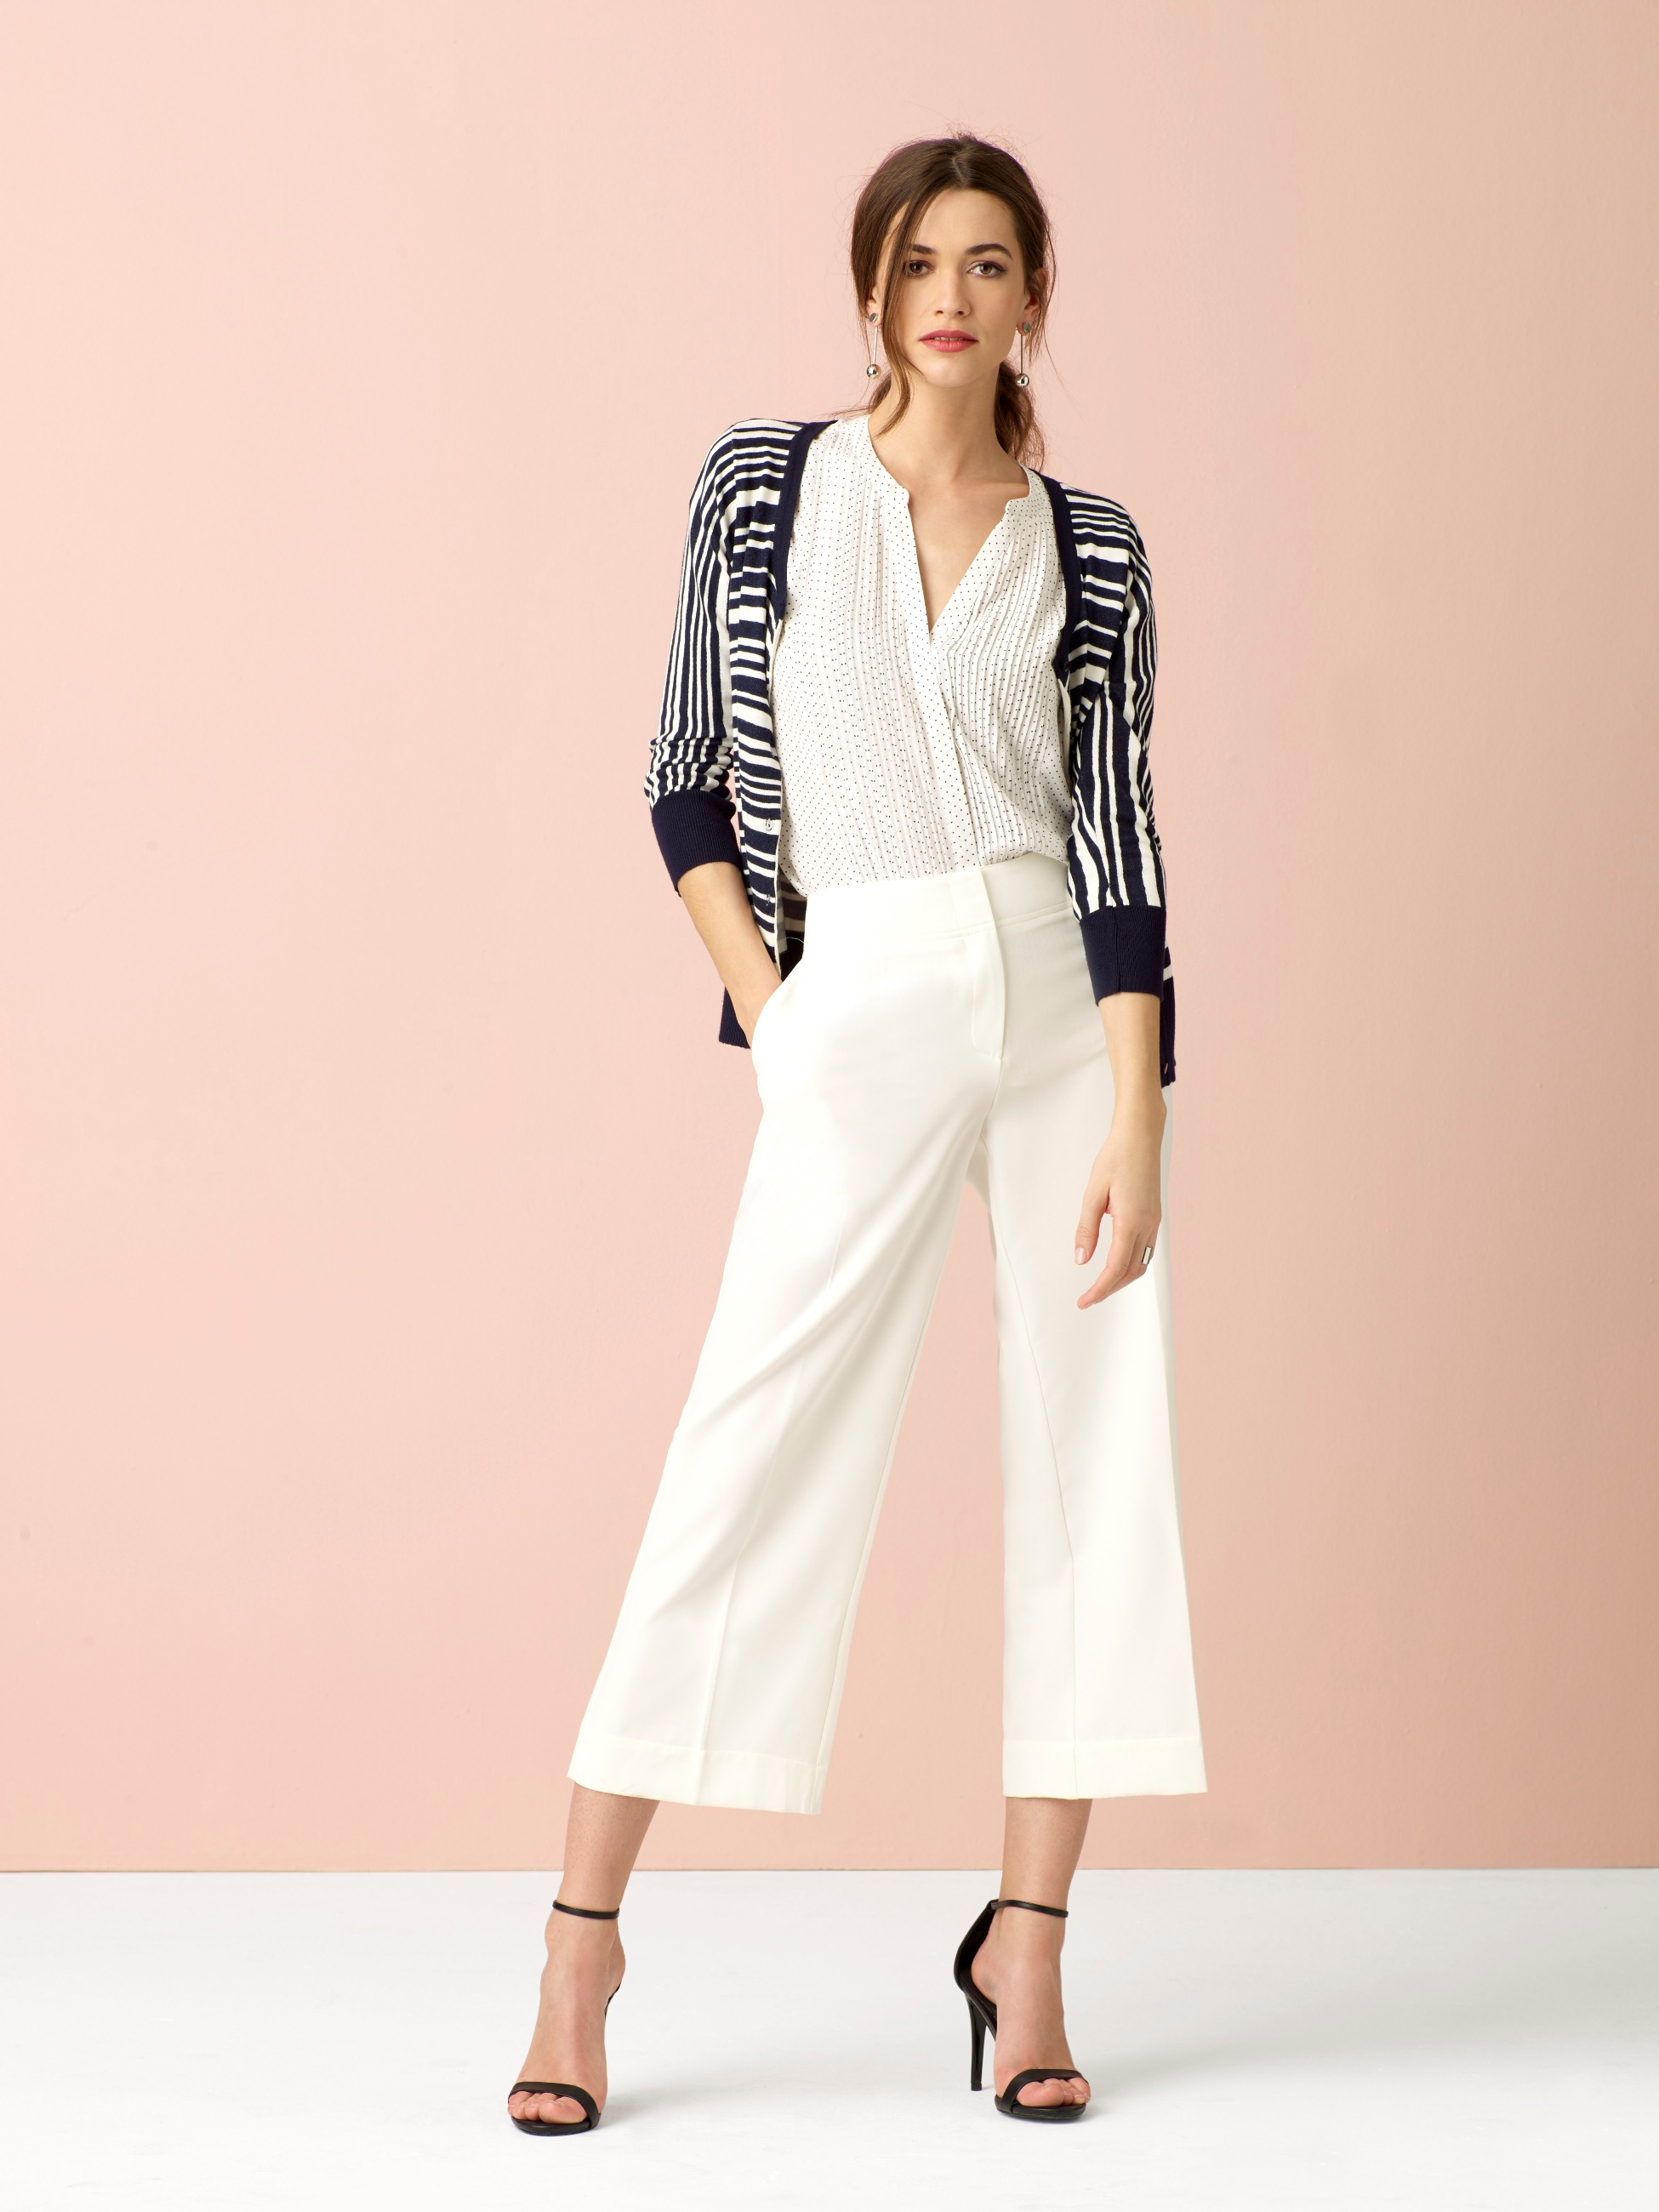 Simply Styled Women's Cardigan - Striped